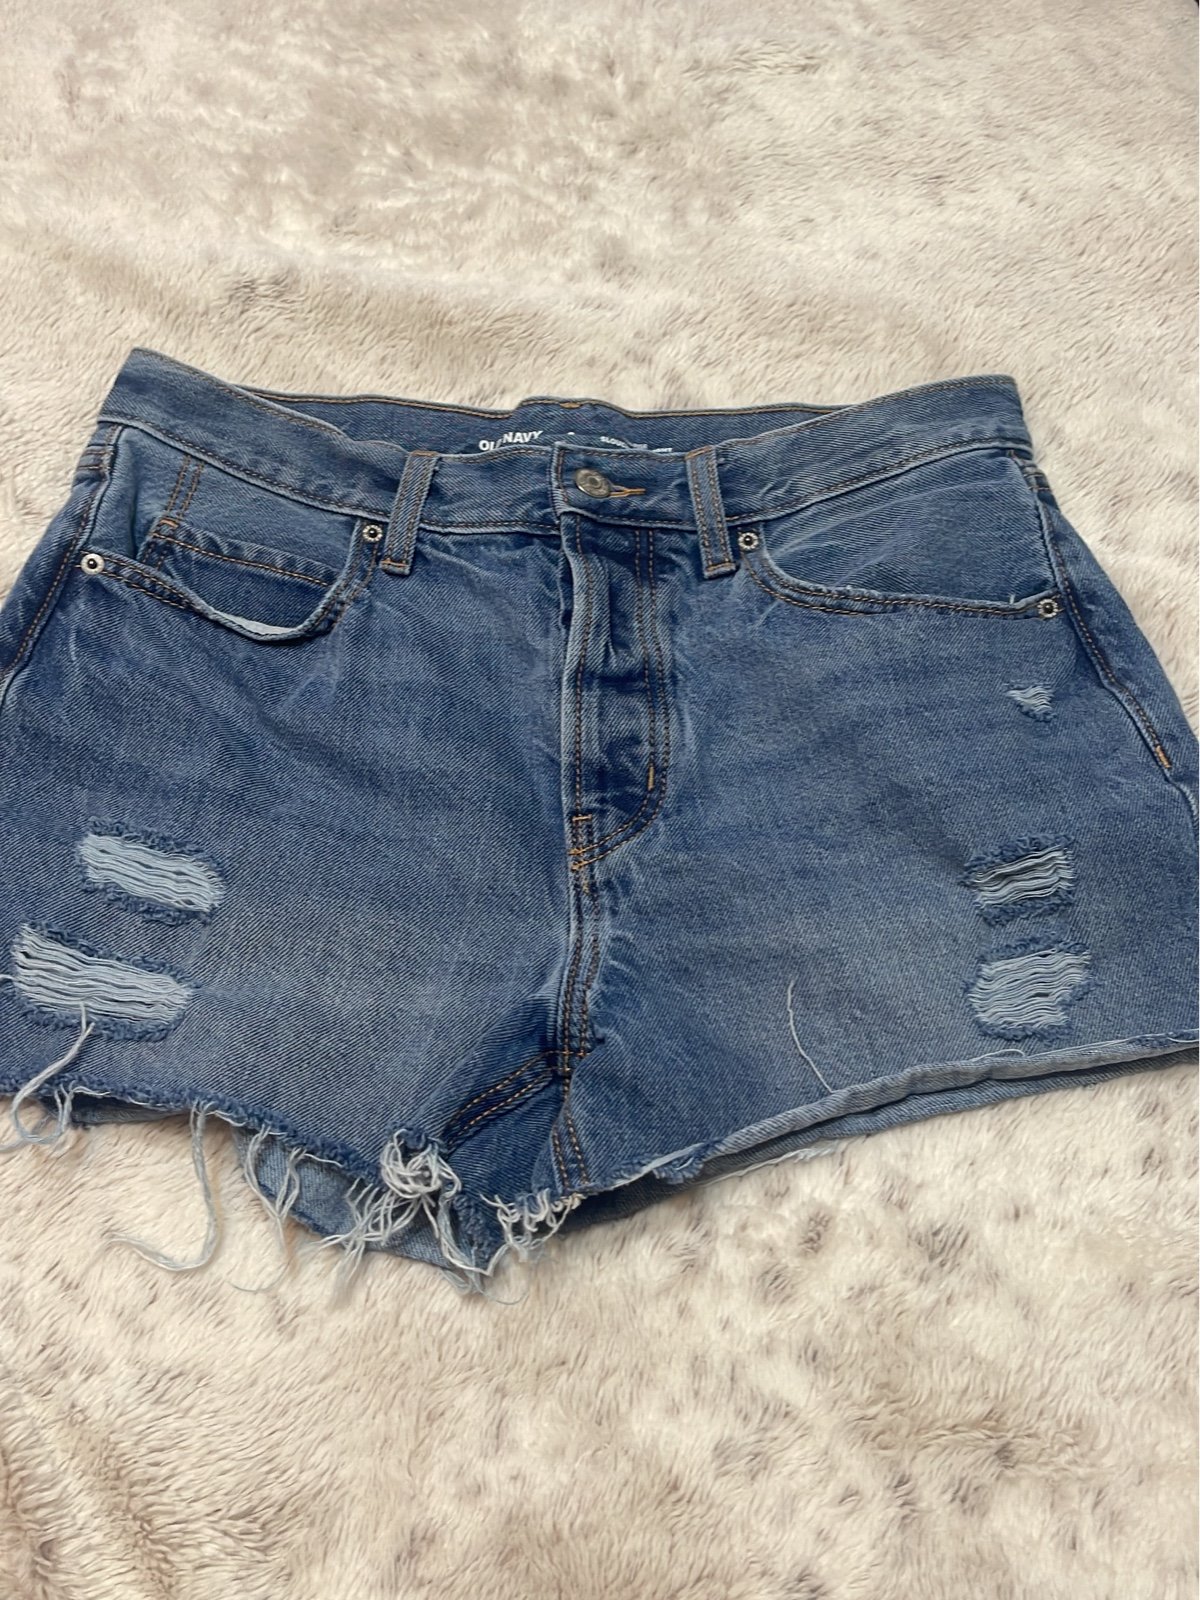 floor price Jean Shorts MeA4UCuLy for sale